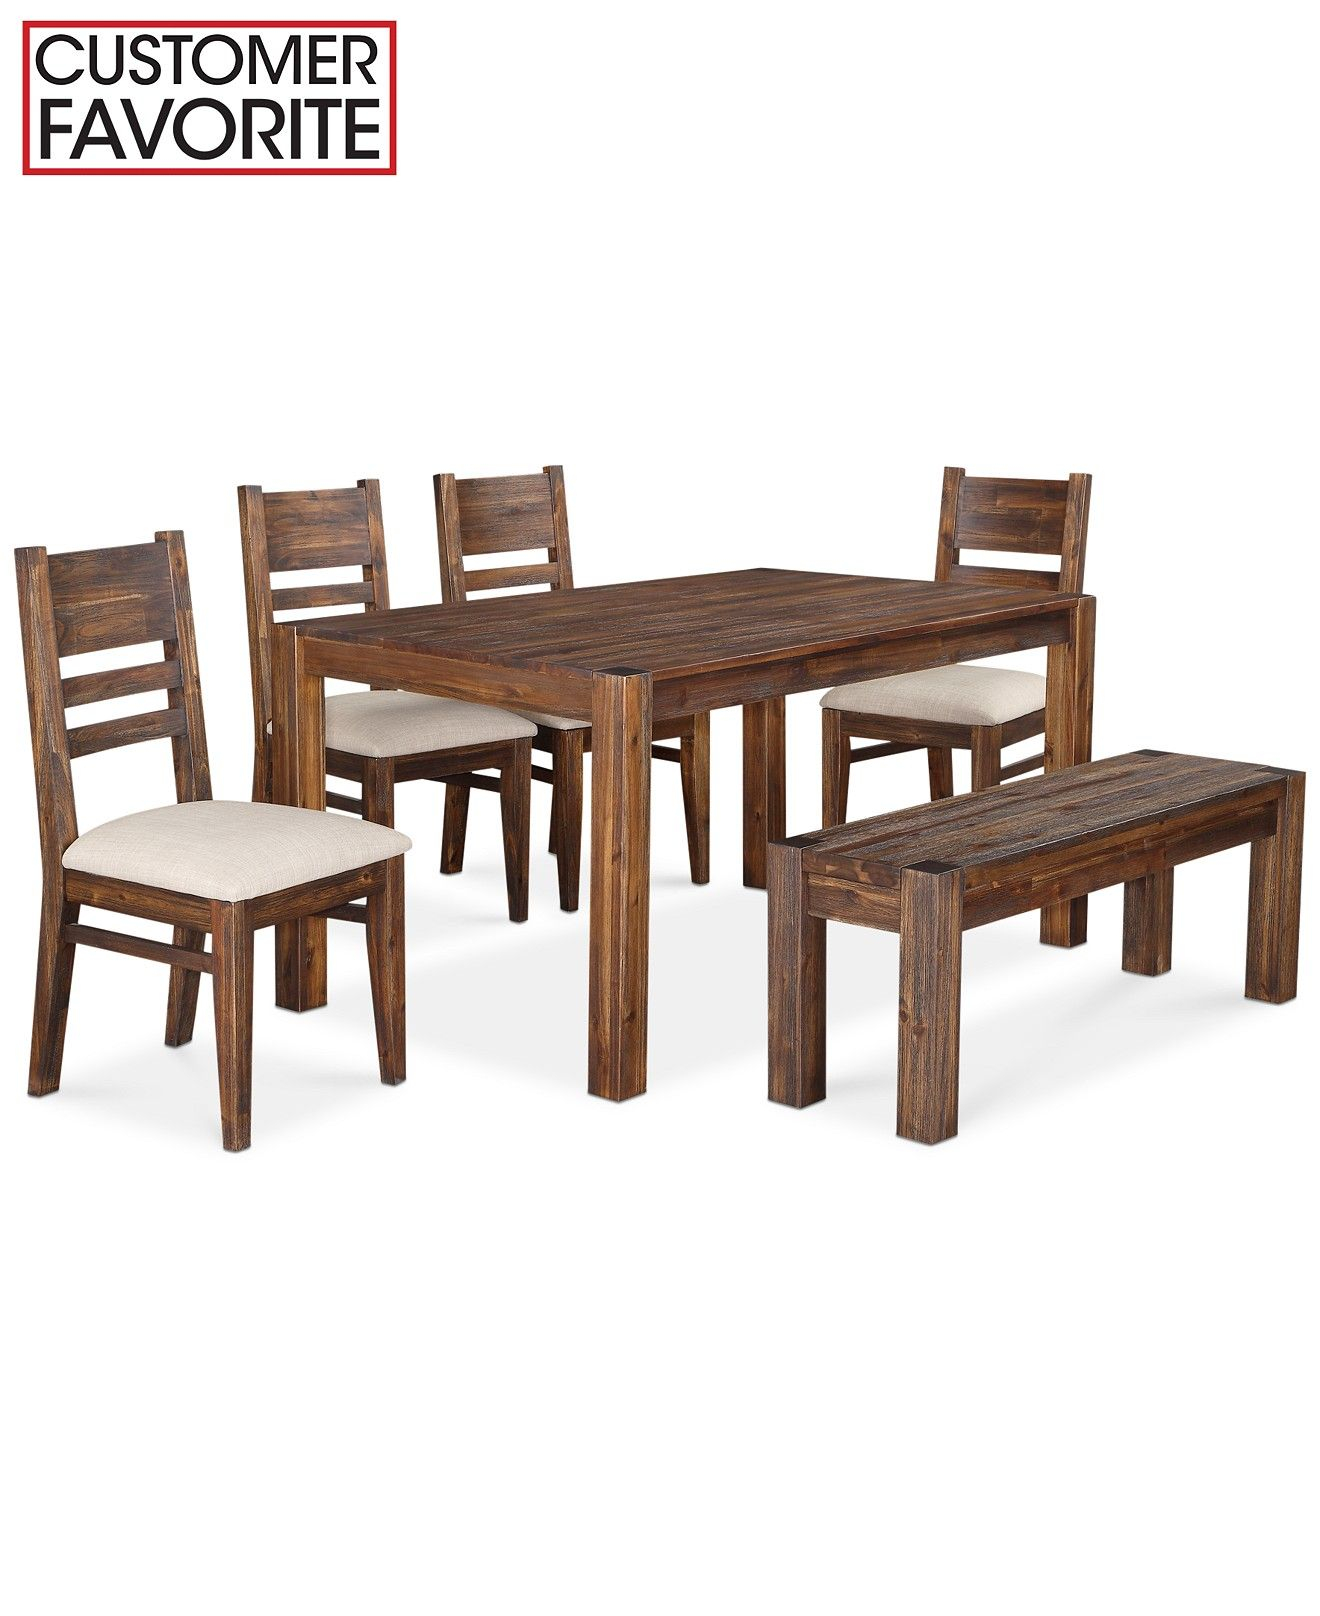 Avondale 6 Pc Dining Room Set Created For Macys 60 with regard to size 1320 X 1616